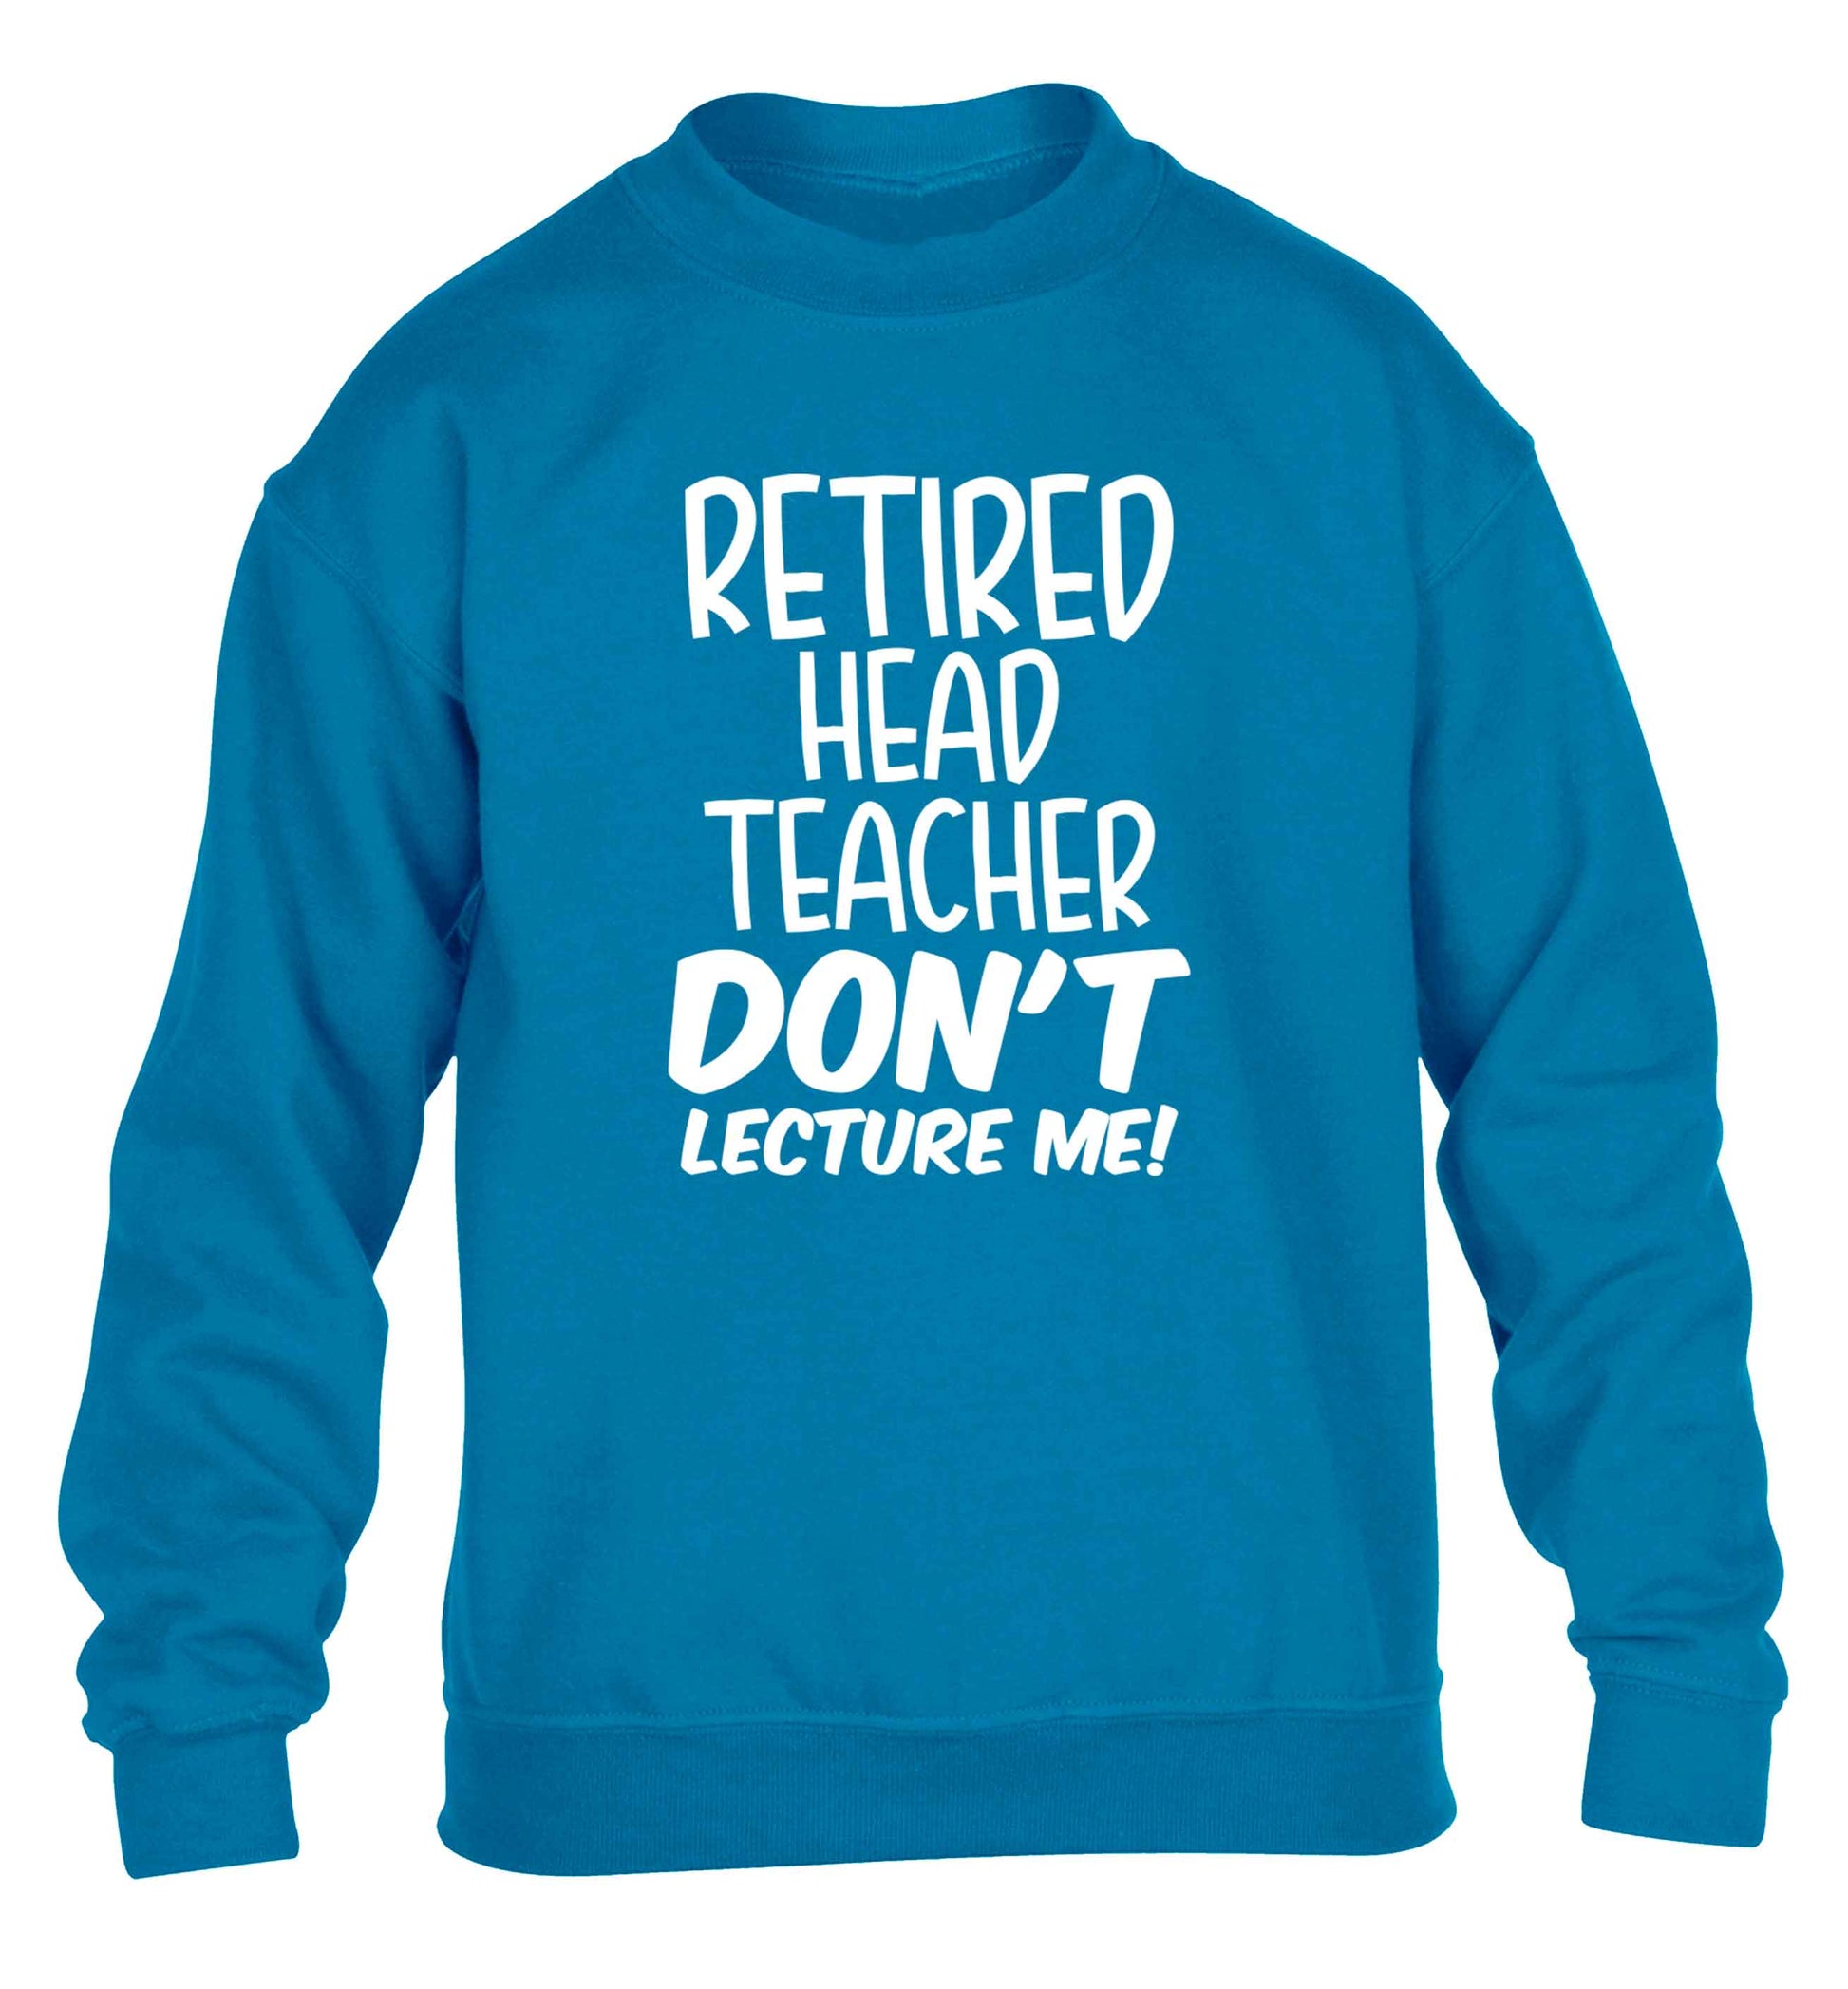 Retired head teacher don't lecture me! children's blue sweater 12-13 Years